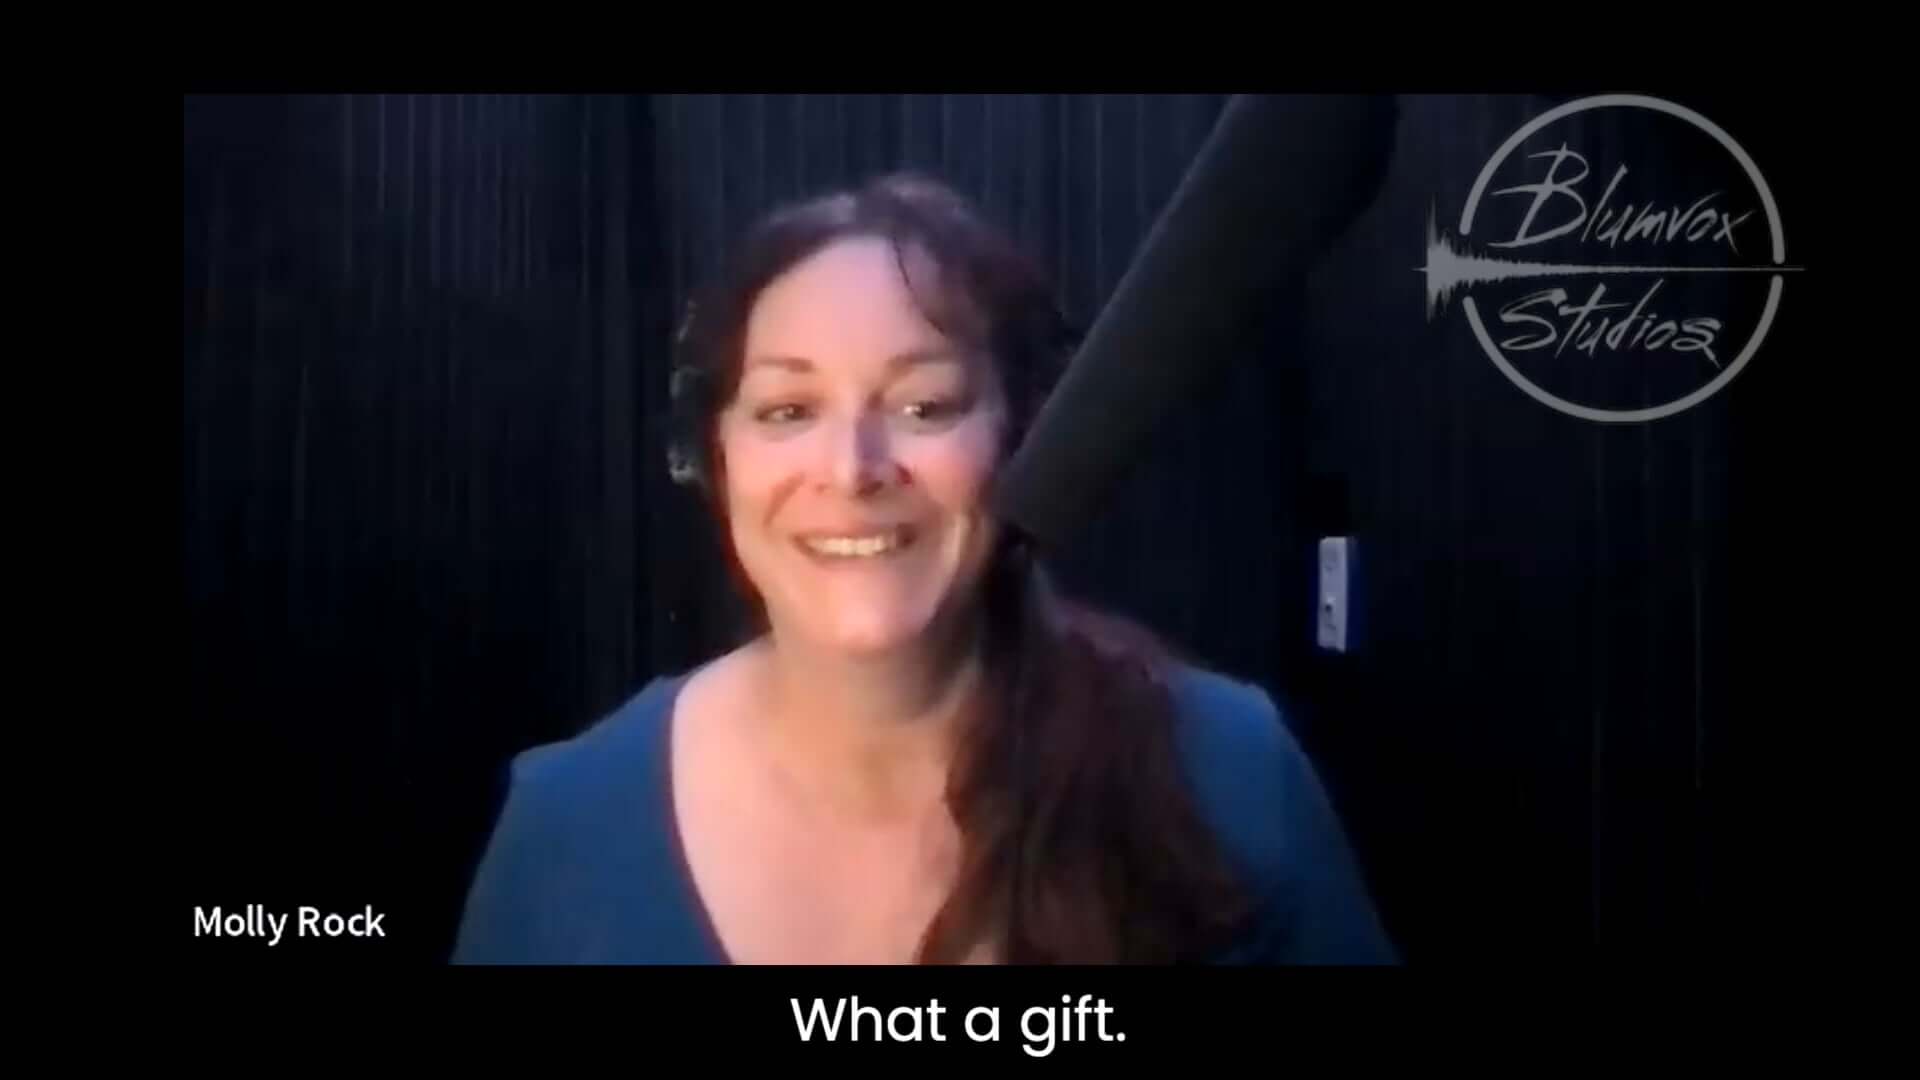 Black background image featuring the face of Blumvox Studios student Molly Rock with the caption "What a gift"